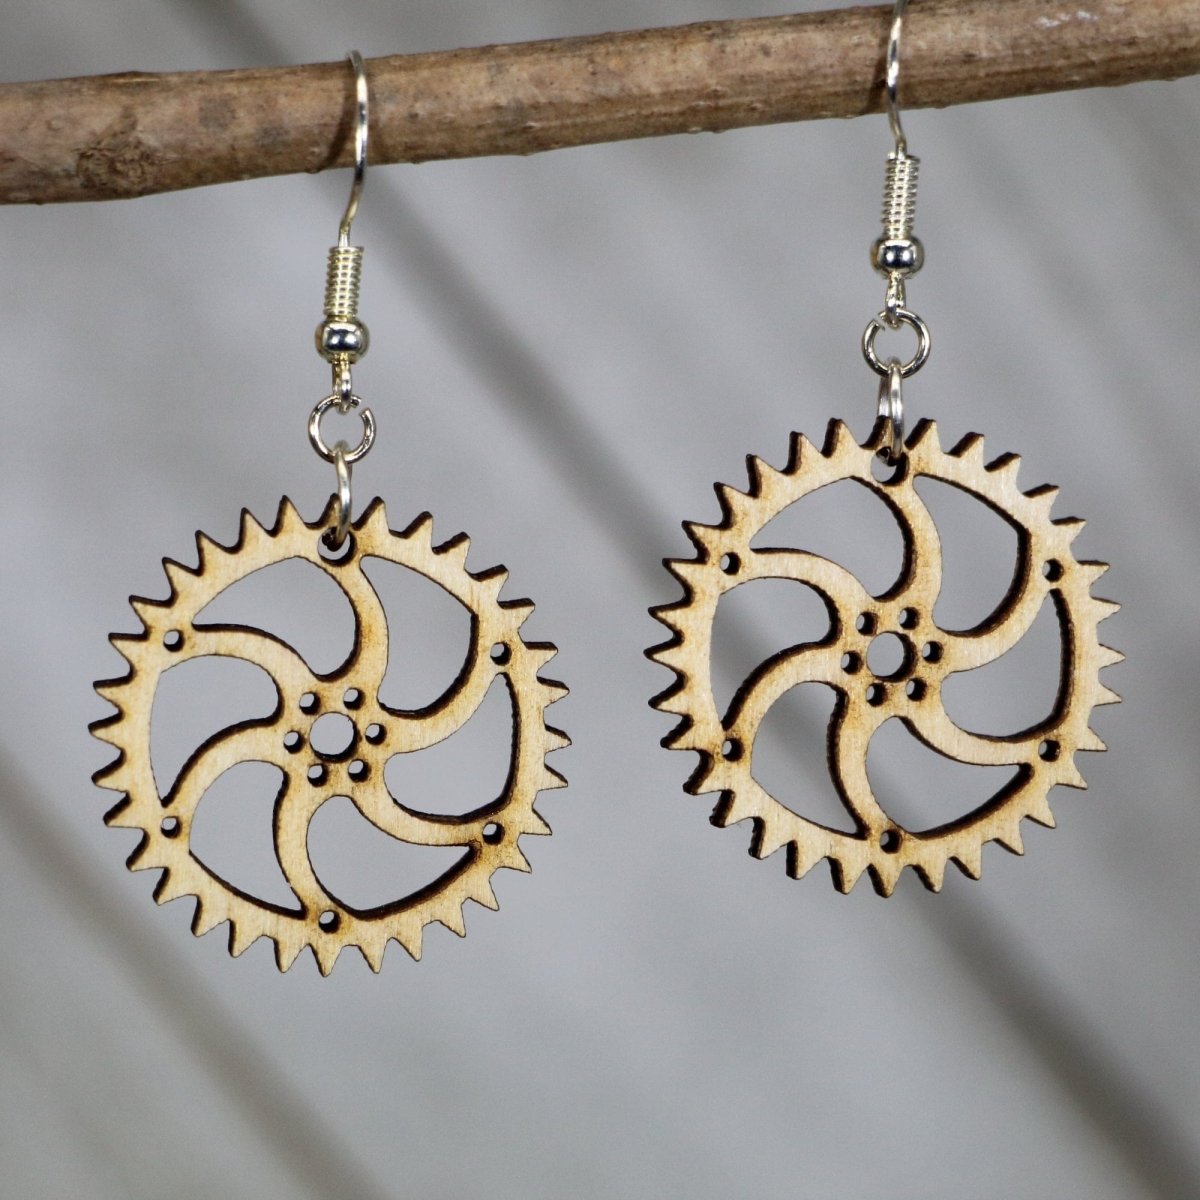 Steampunk Gear Wooden Dangle Earrings - Natural - Cate's Concepts, LLC